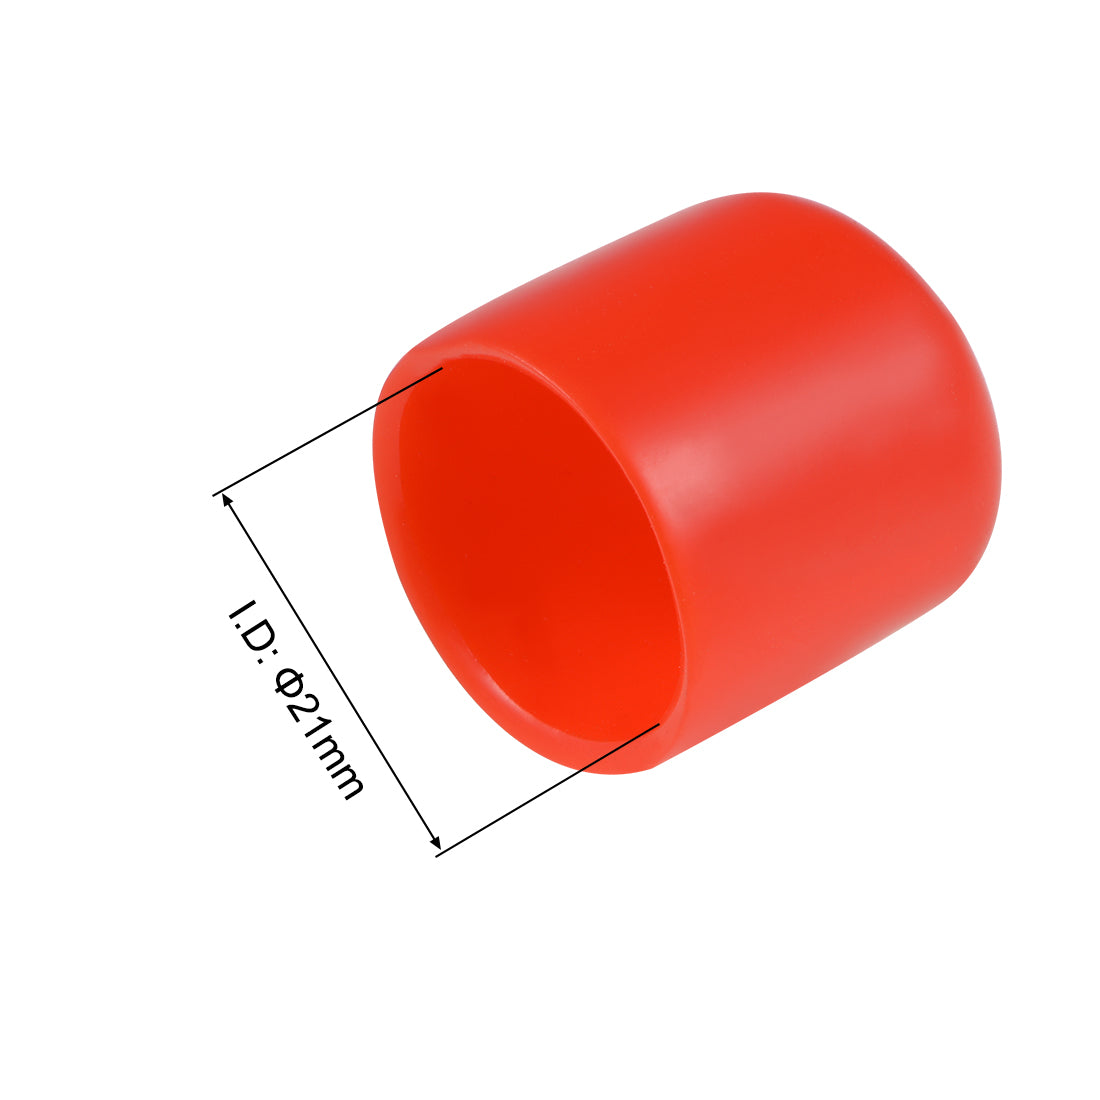 uxcell Uxcell 15pcs Rubber End Caps 21mm ID 25mm Height Screw Thread Protectors Red